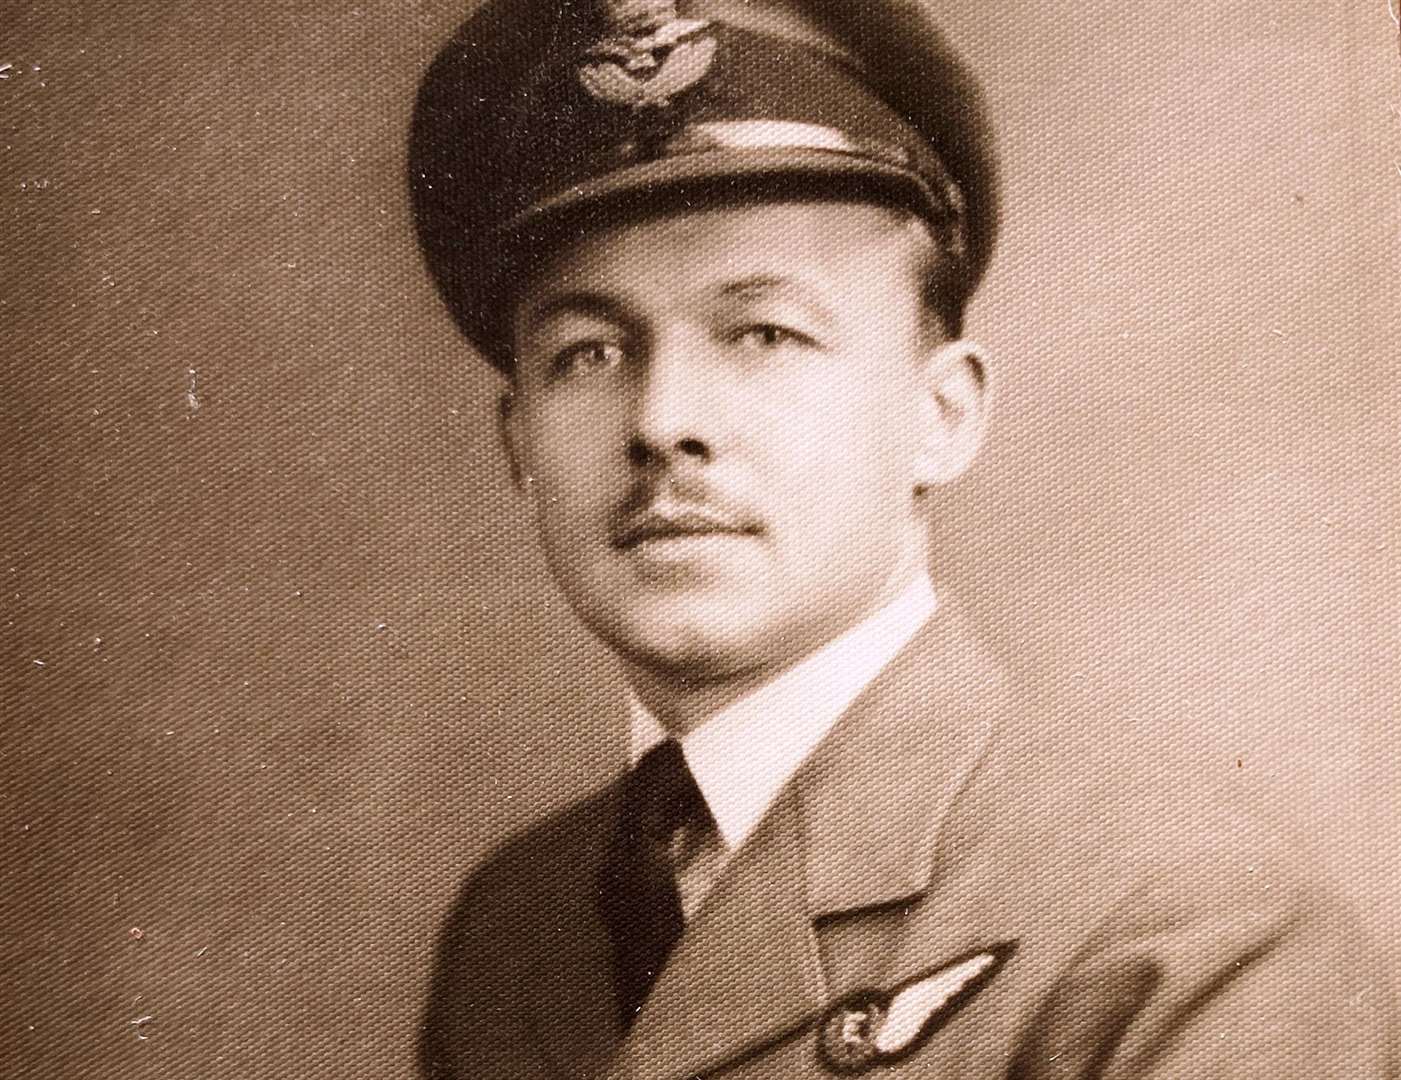 George Smith was commissioned into the RAF in 1944